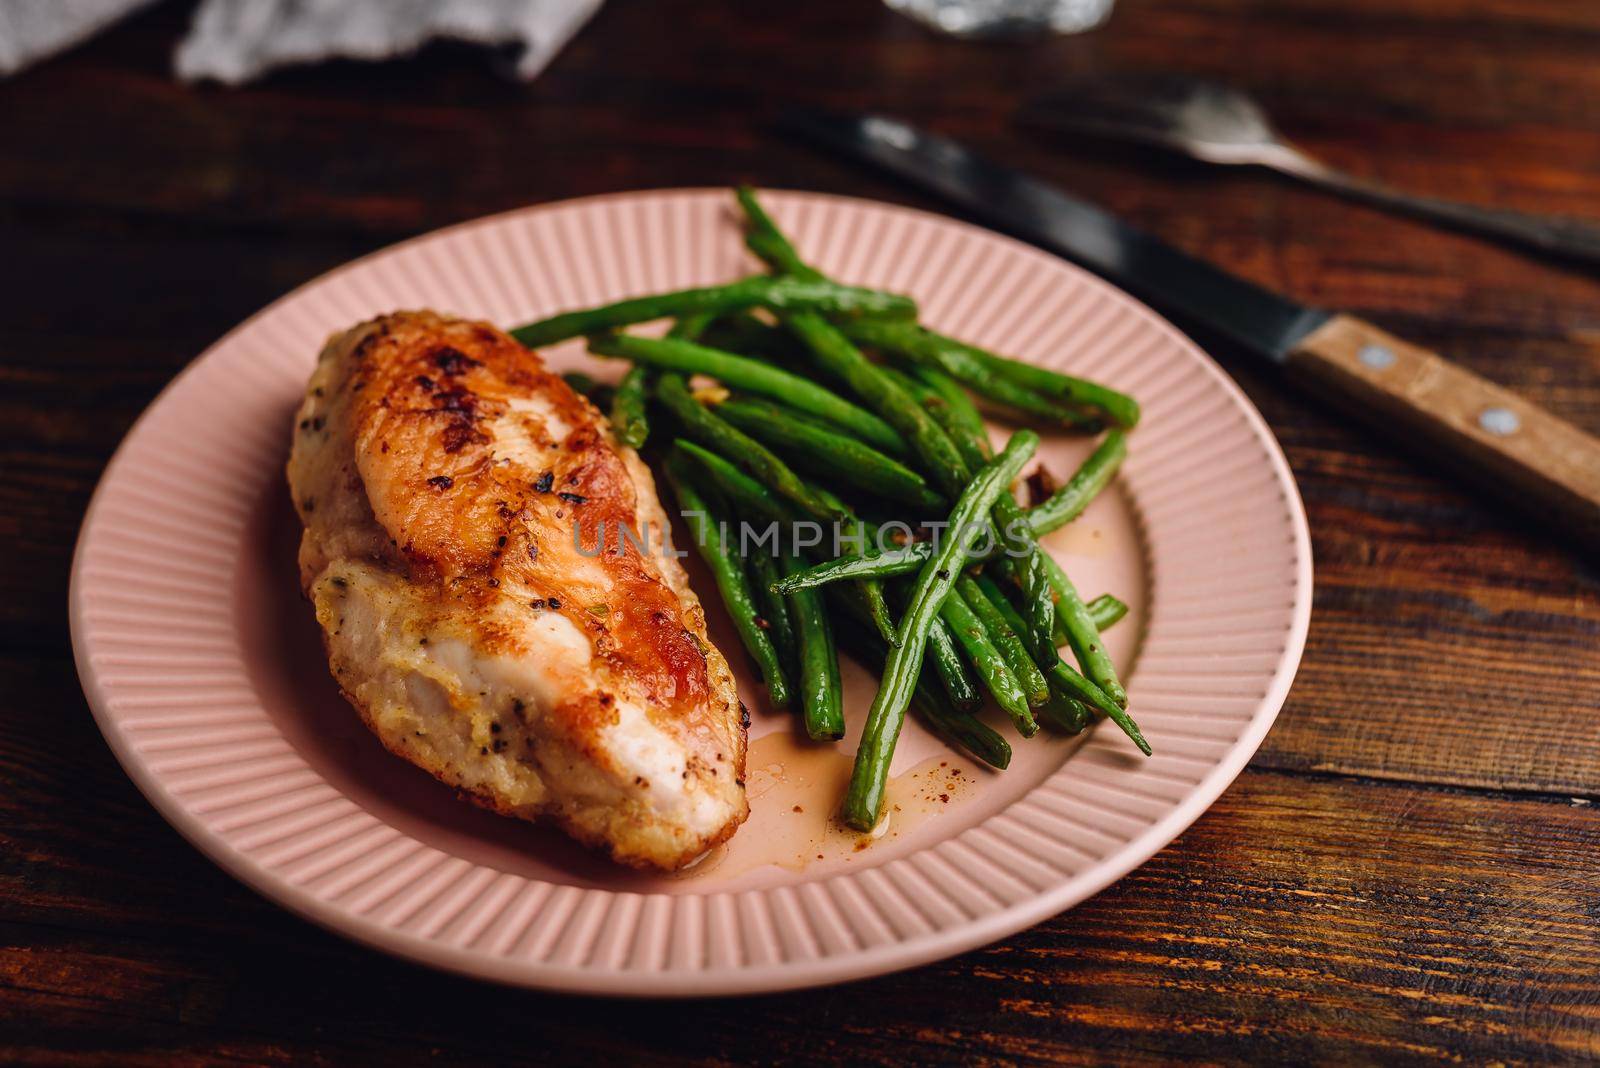 Baked Chicken Breast and Fried Green Beans by Seva_blsv